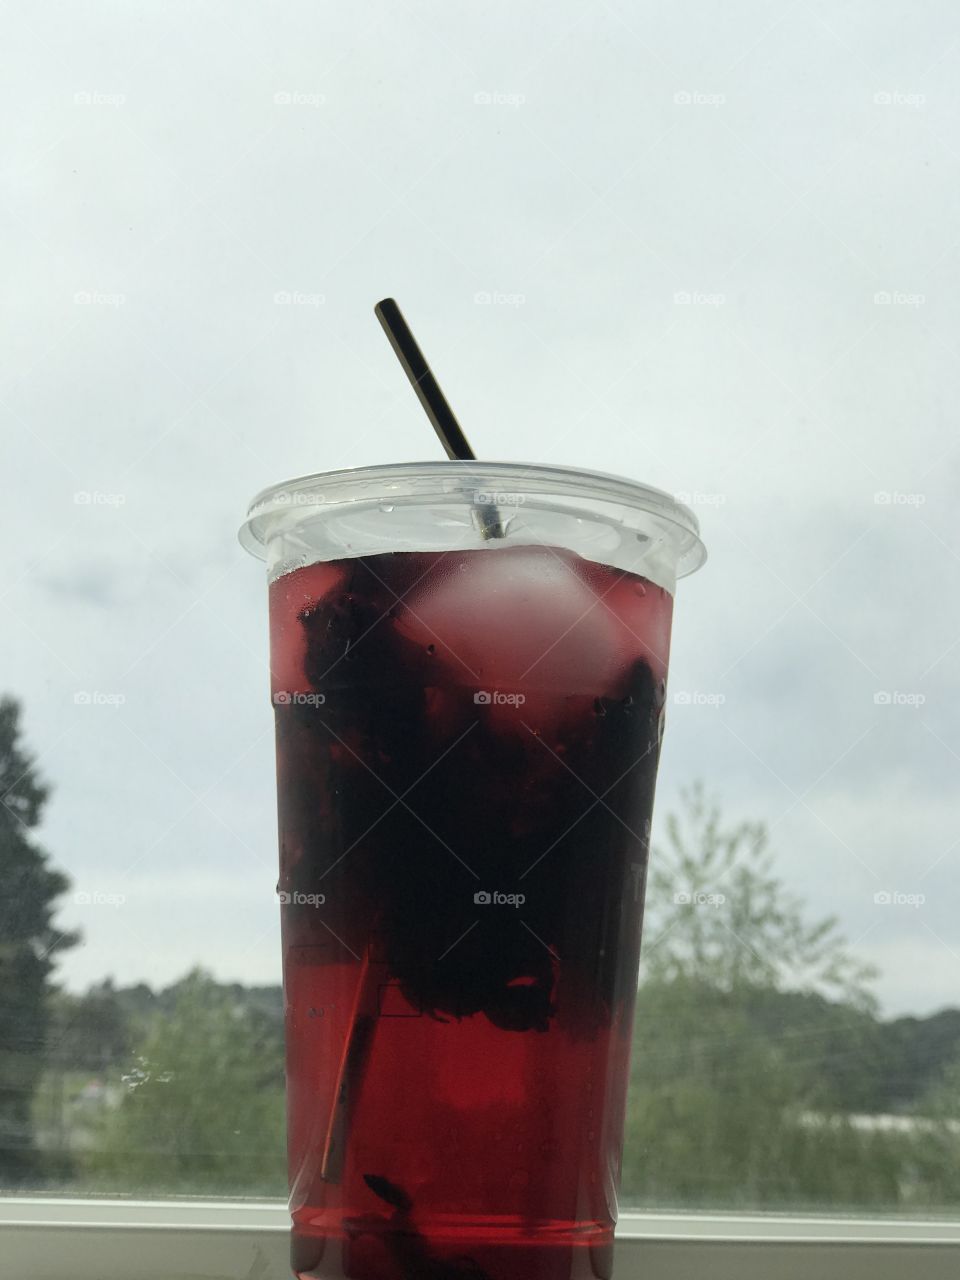 “Agua fresca de Jamaica” ~ I love getting the dry hibiscus leaves, dropping some in a container, fill it up with ice and water, let it simmer a bit and then enjoy it nice and cold, no sugar needed. #NoFilters